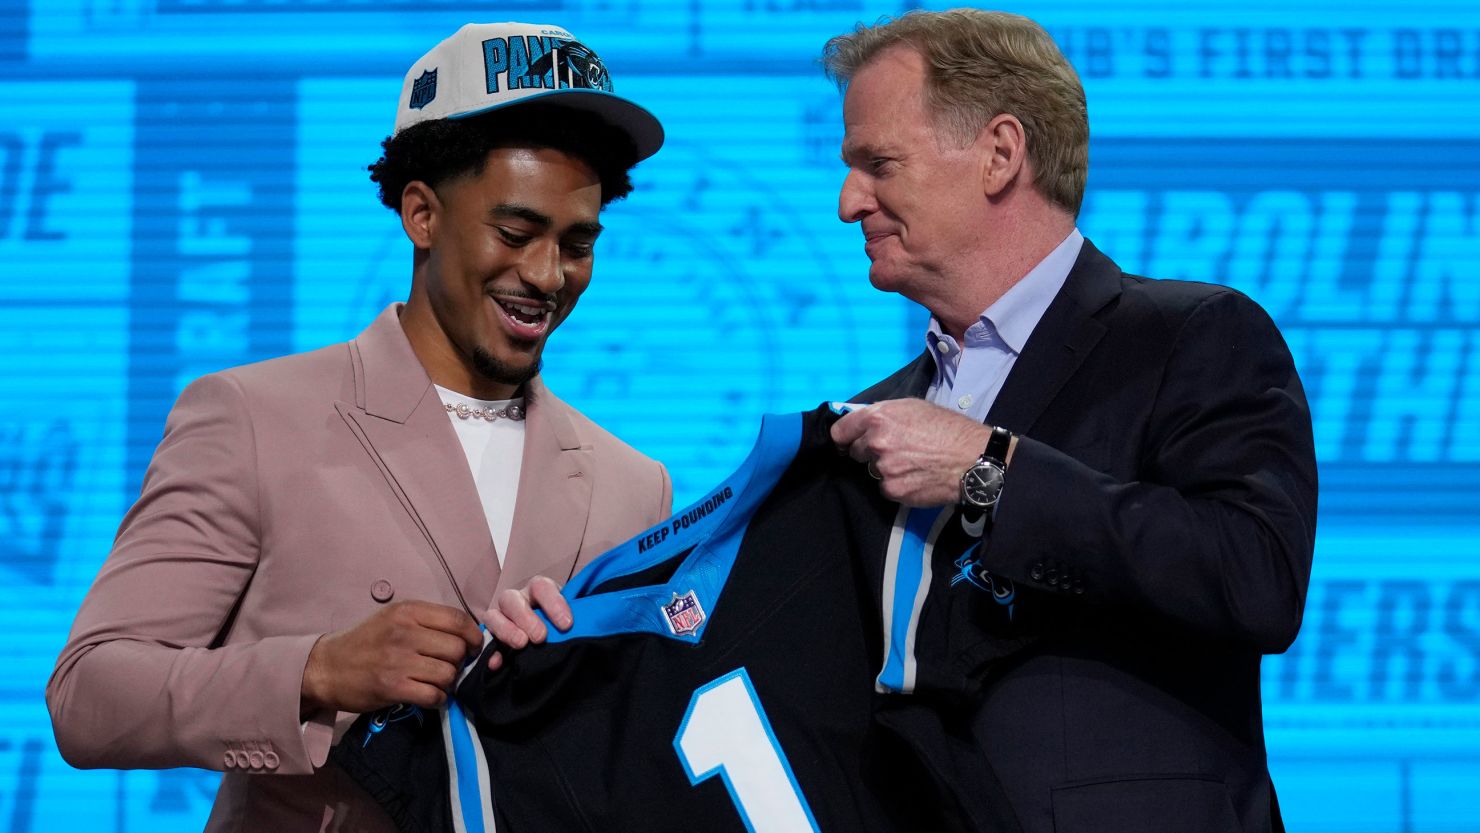 Alabama quarterback Bryce Young gets a Carolina Panthers jersey from NFL Commissioner Roger Goodell.